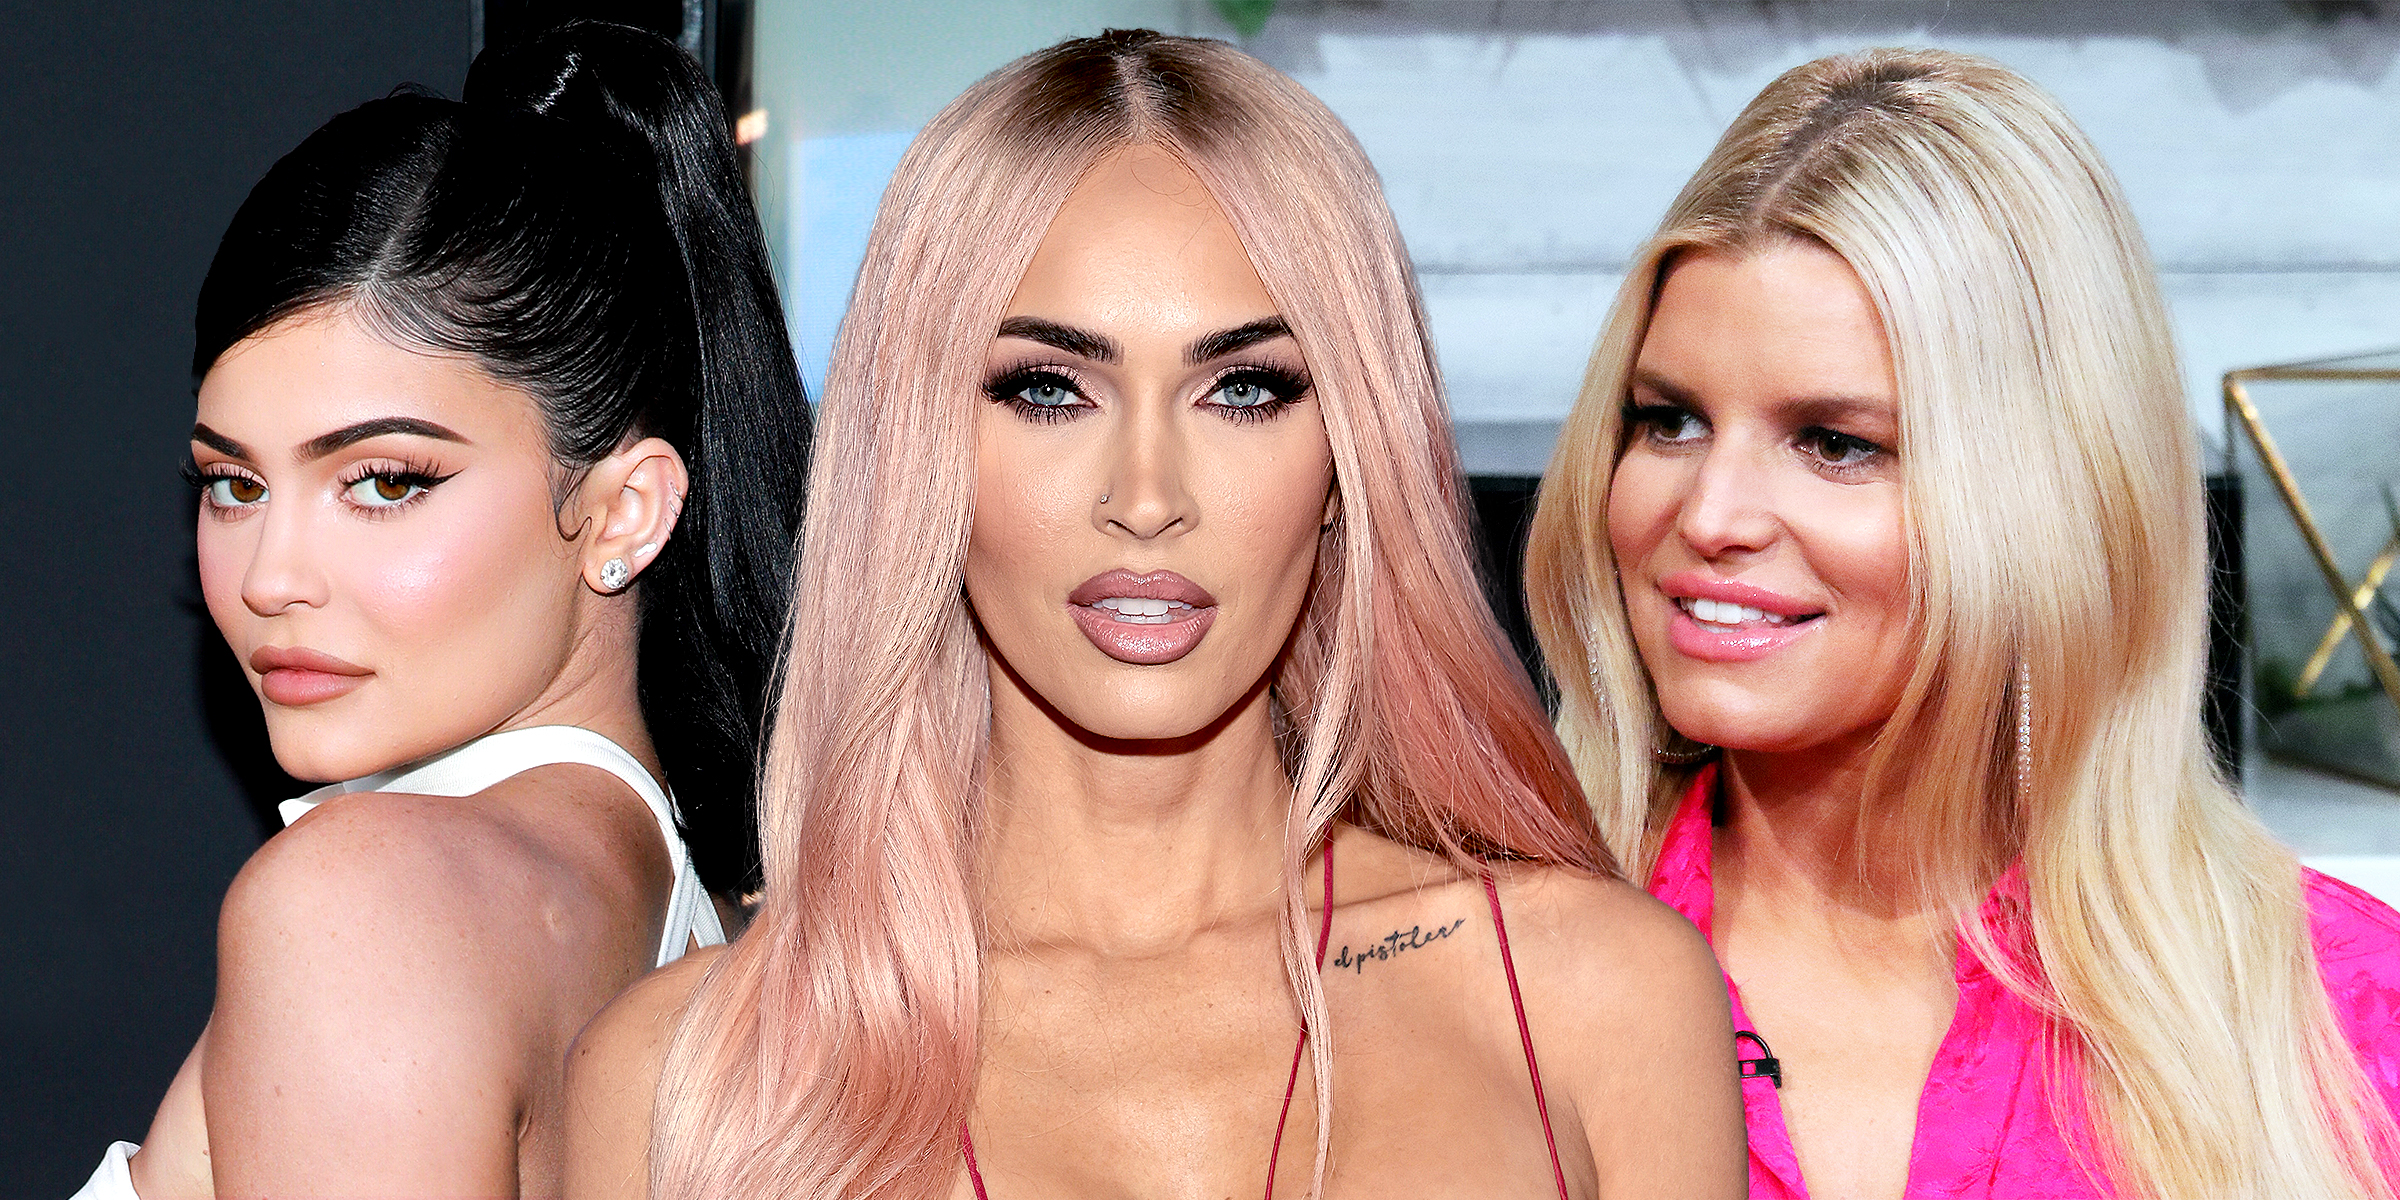 Kylie Jenner, Megan Fox, and Jessica Simpson | Source: Getty Images